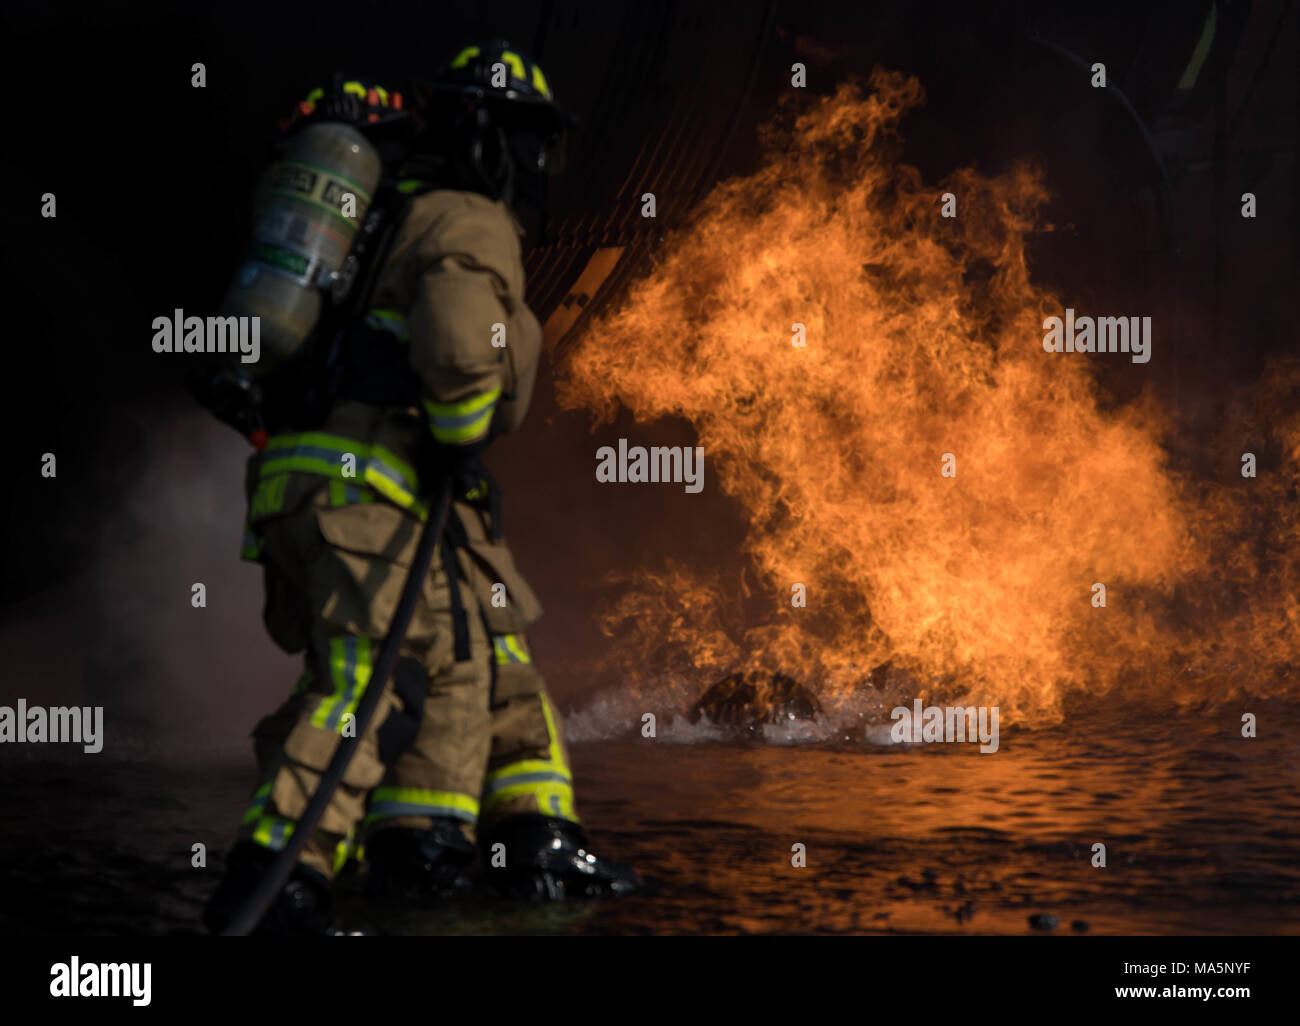 Airman 1st Class Alessandre Nagano, 2nd Civil Engineering Squadron firefighter, and Staff Sgt. Joseph Chavez, 2nd CES fire department crew chief, extinguish a fire during a live burn training exercise at Barksdale Air Force Base, La., March 21, 2018. During these exercises, the fires are fueled by propane and controlled by personnel at all times. (U.S. Air Force photo by Airman 1st Class Tessa B. Corrick) Stock Photo